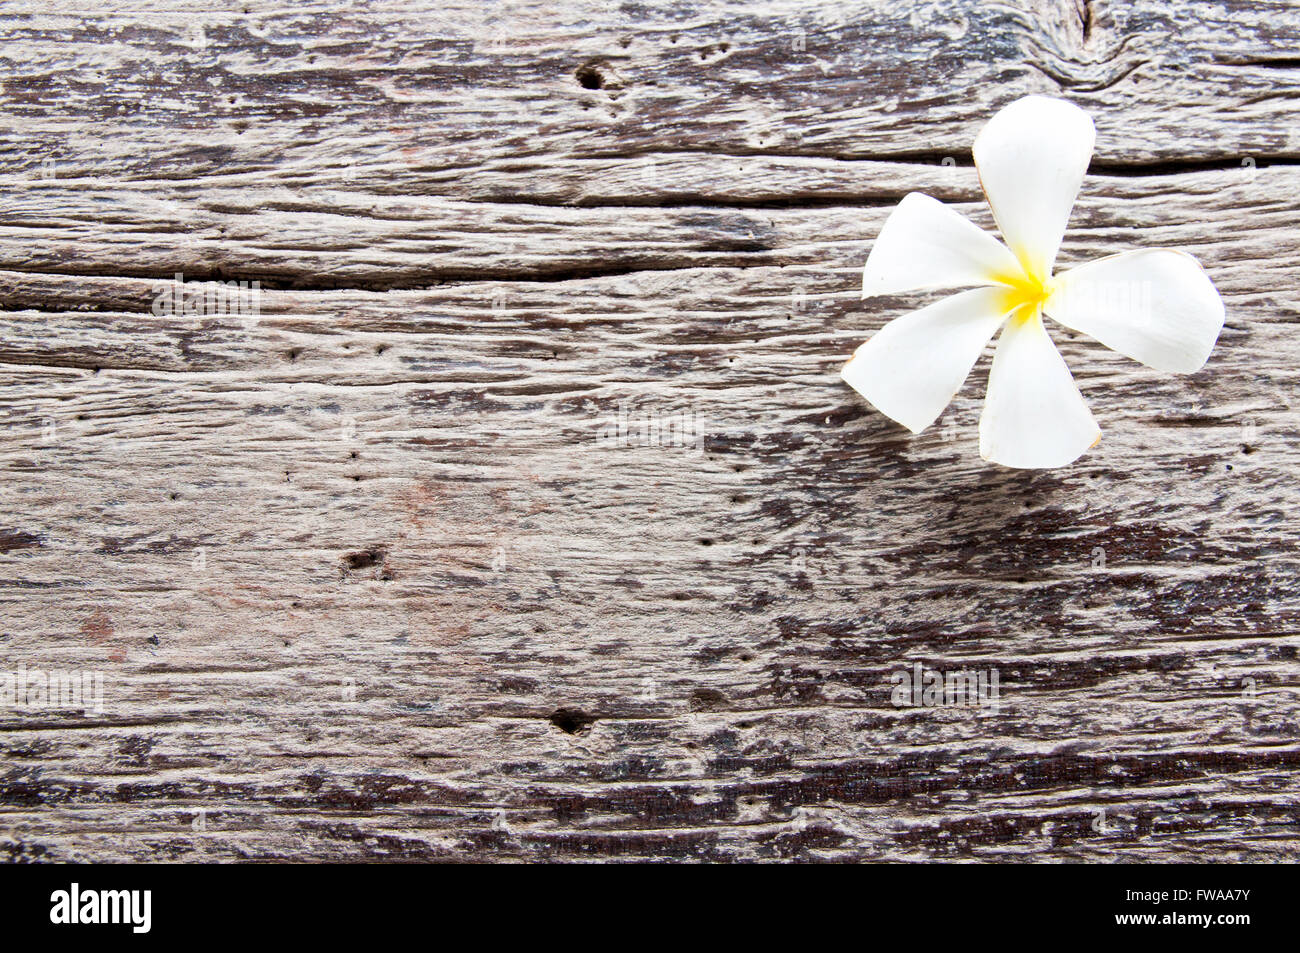 Plumeria one flower on old wood rough surfaces Stock Photo